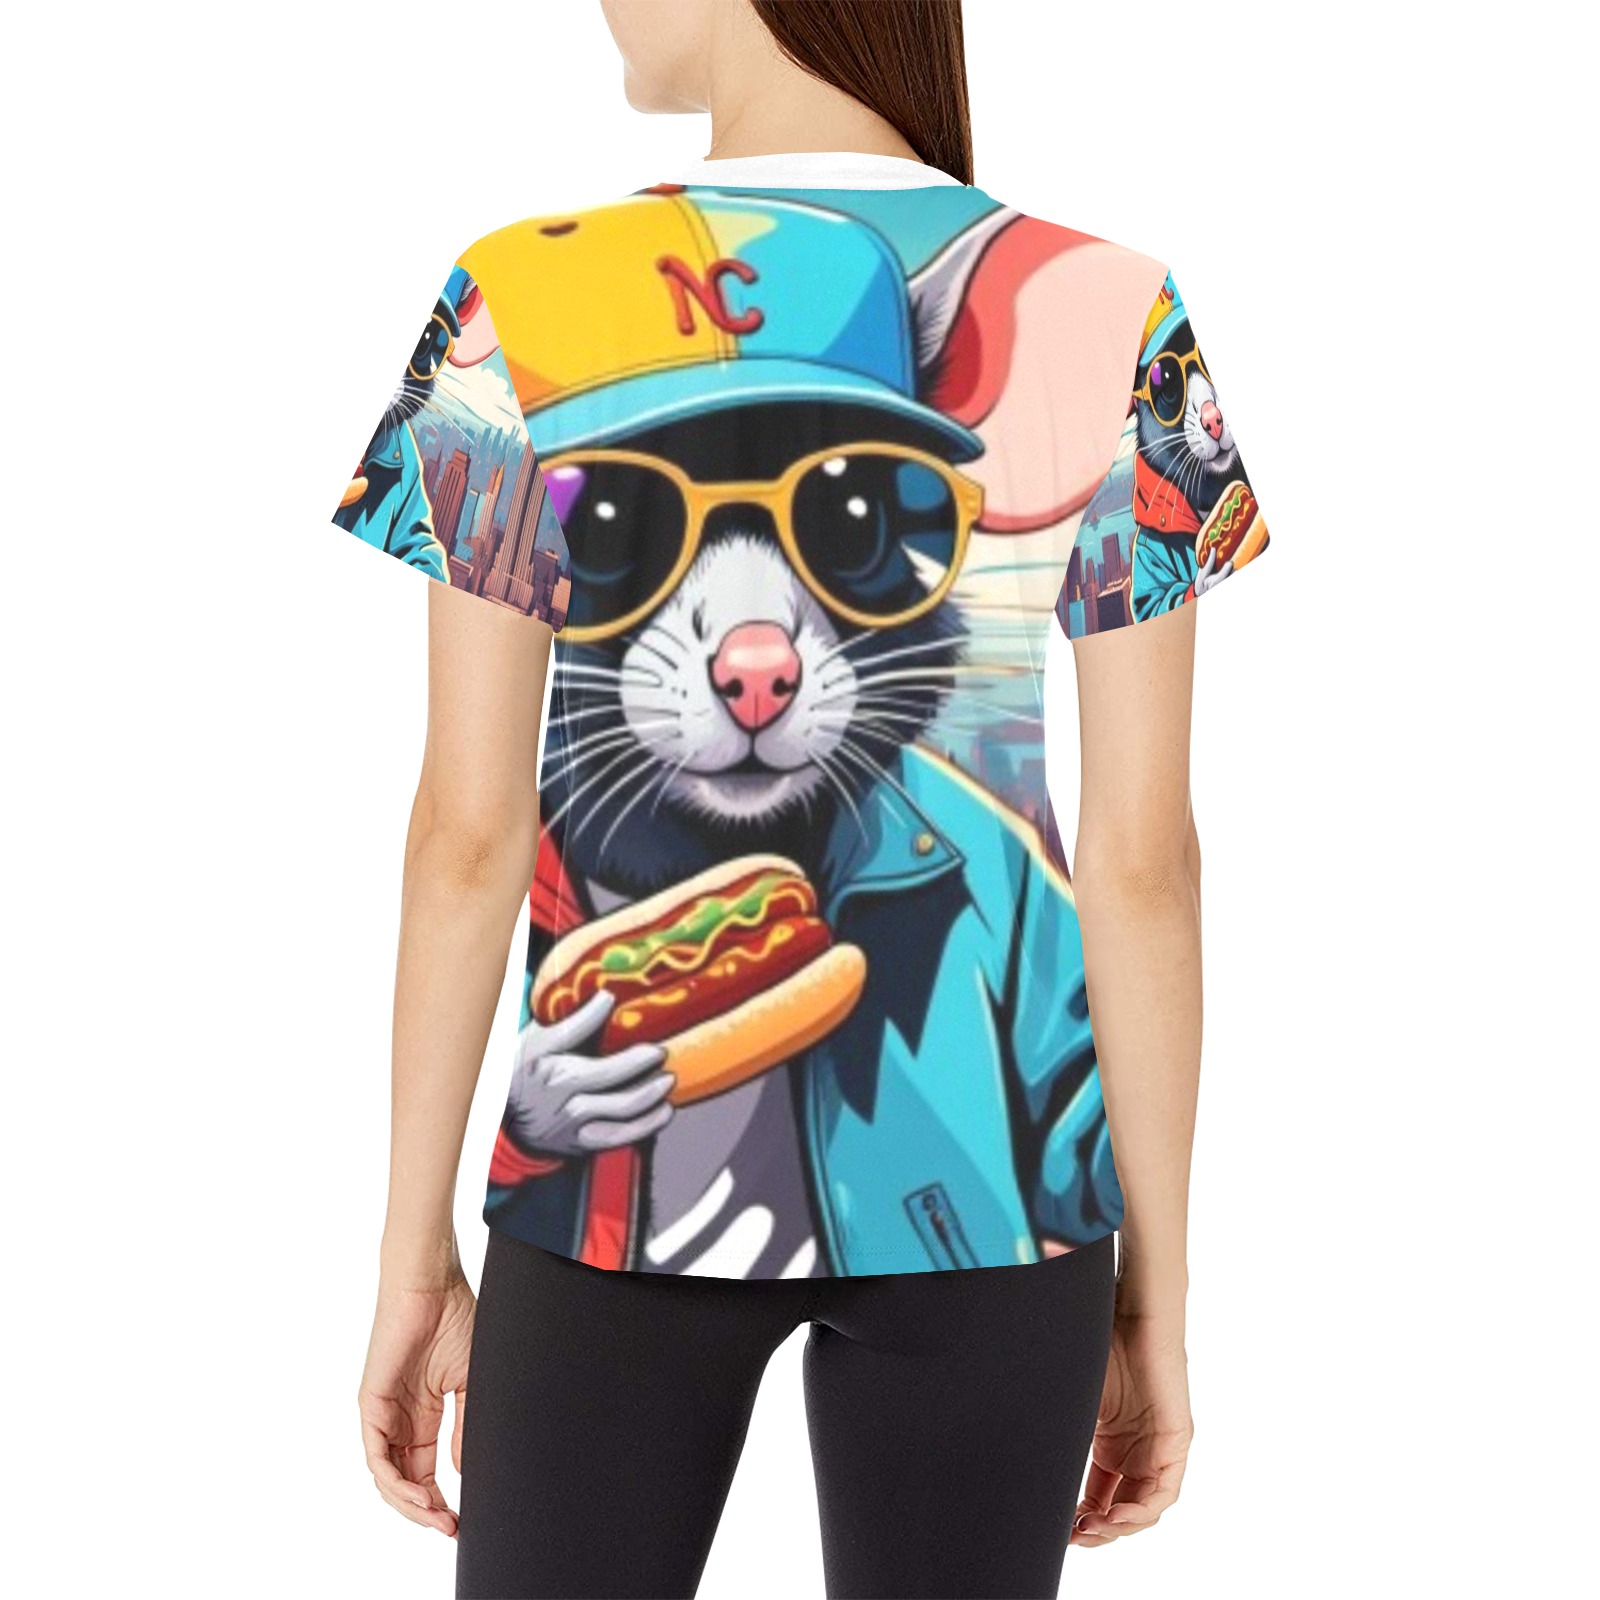 HOT DOG EATING NYC RAT 2 Women's All Over Print Crew Neck T-Shirt (Model T40-2)